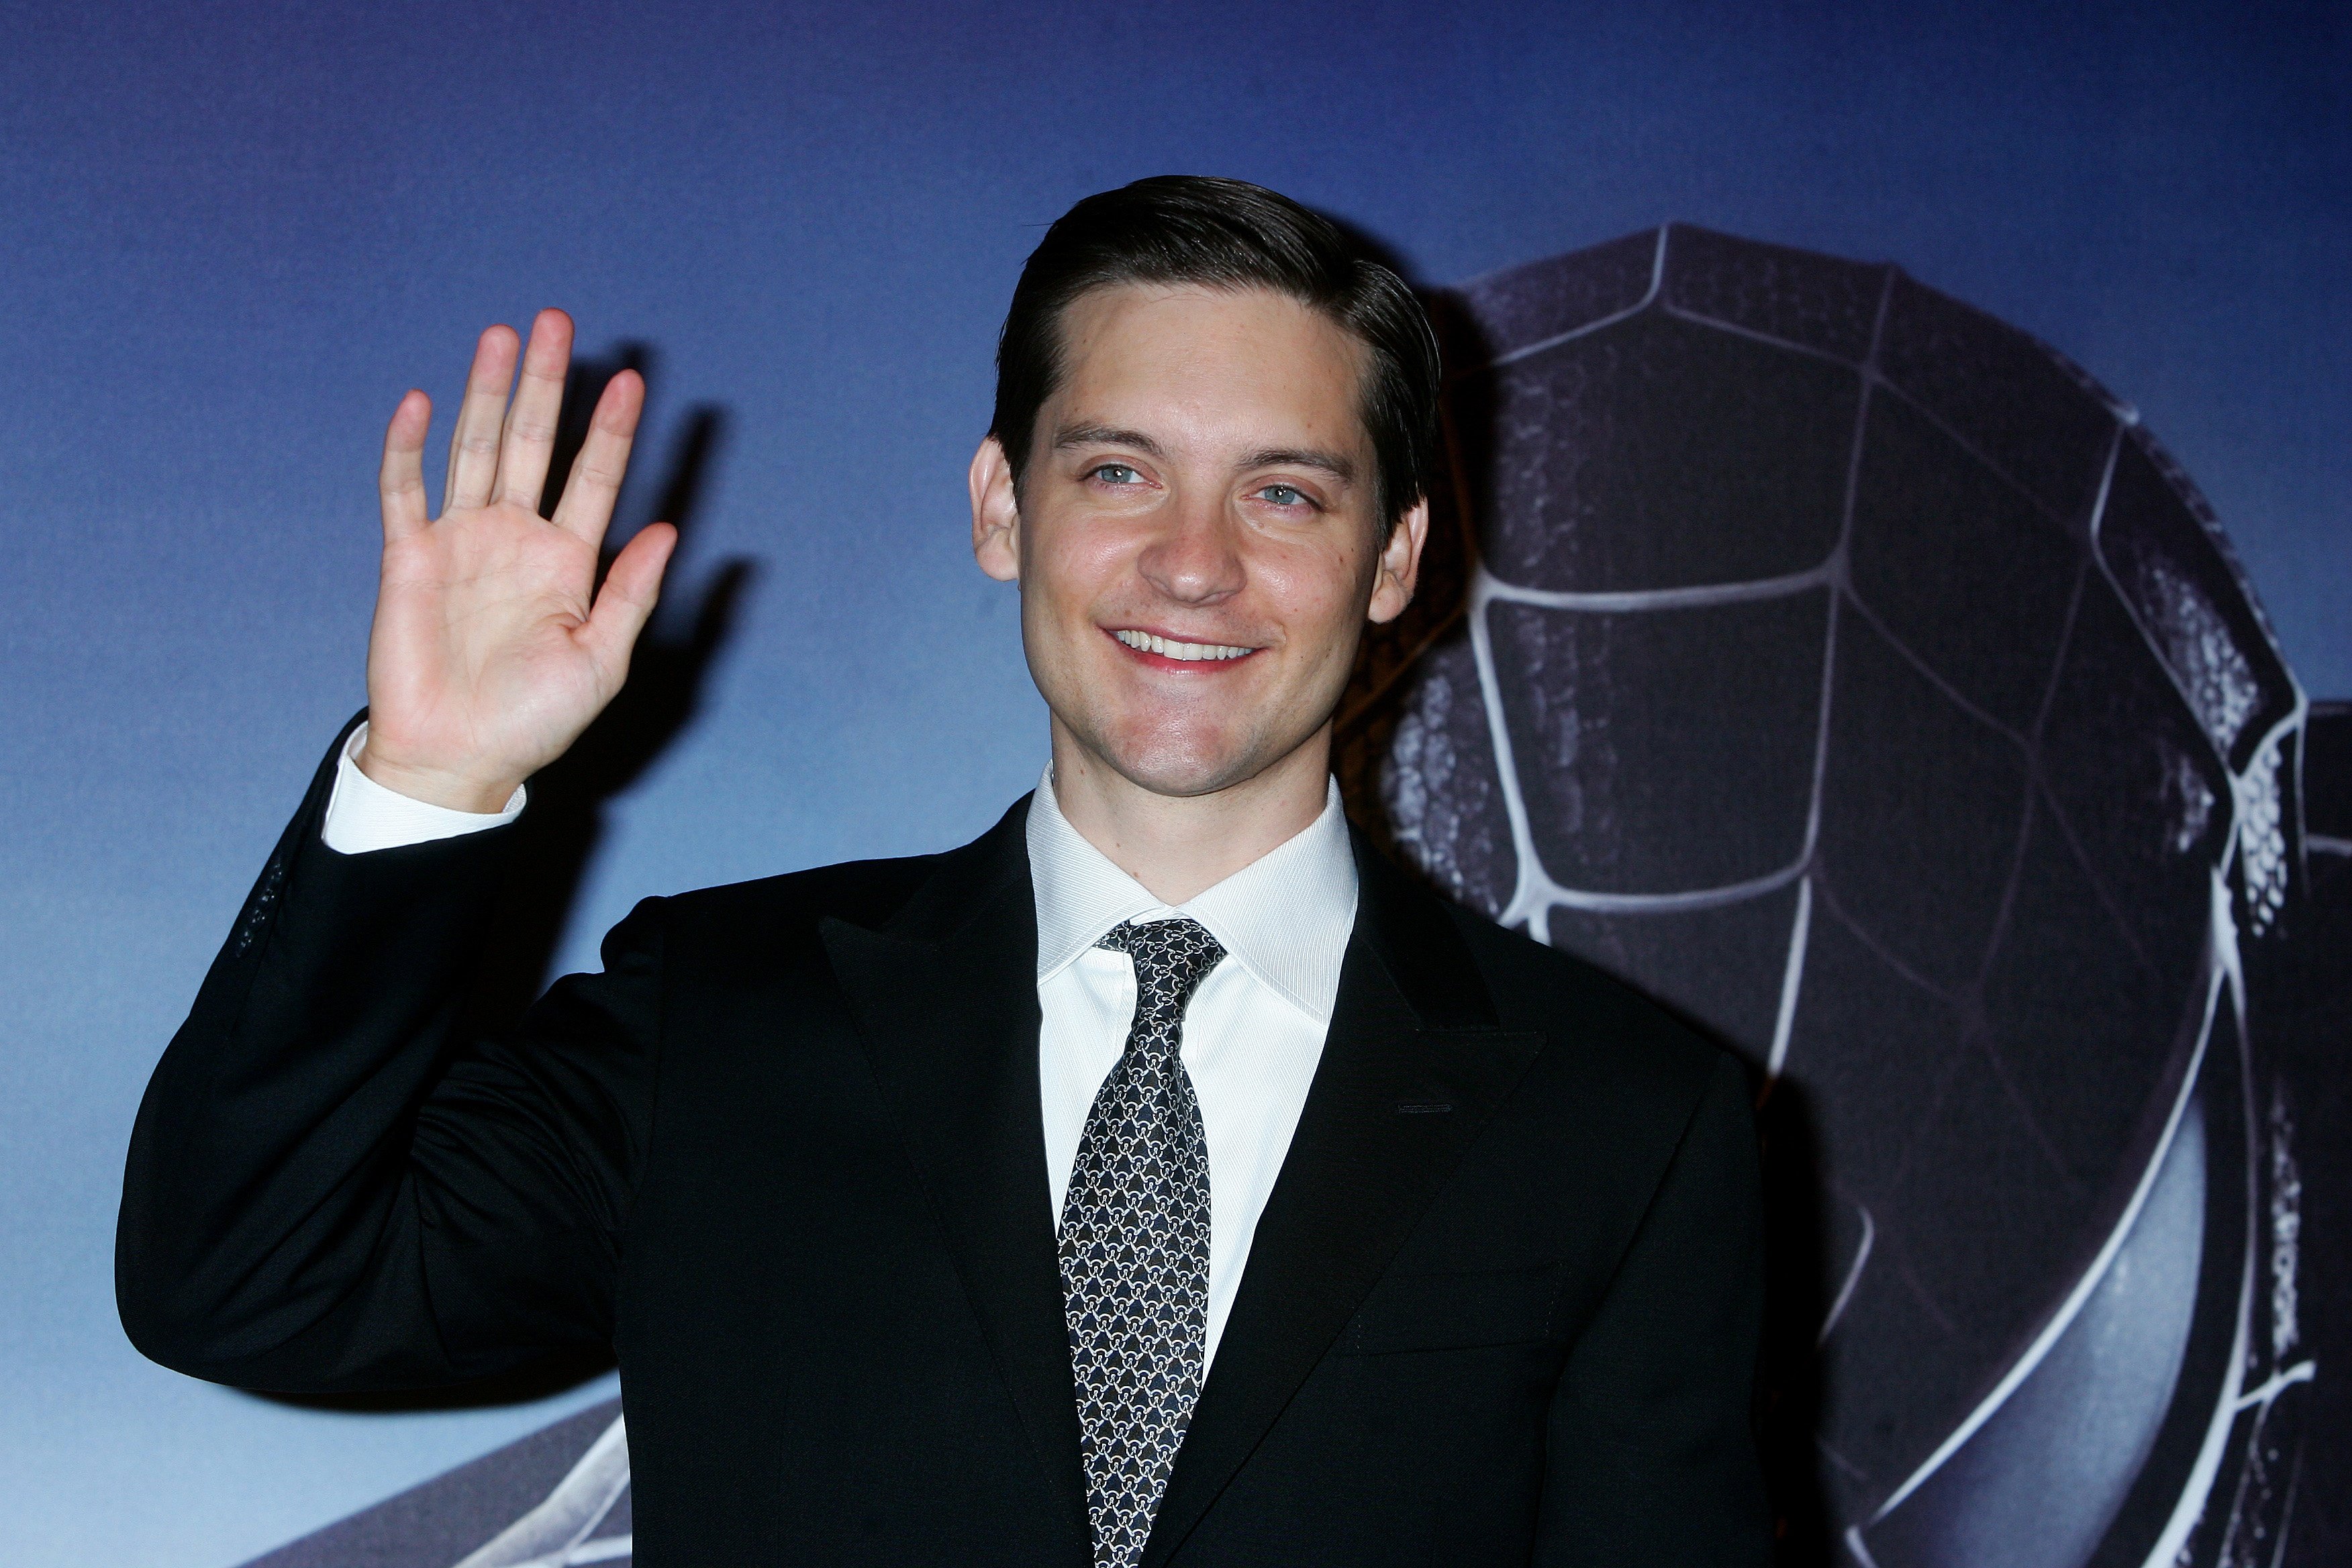 'Spider-Man: No Way Home' star Tobey Maguire wears a black suit over a white button-up shirt and black and gray patterned tie.